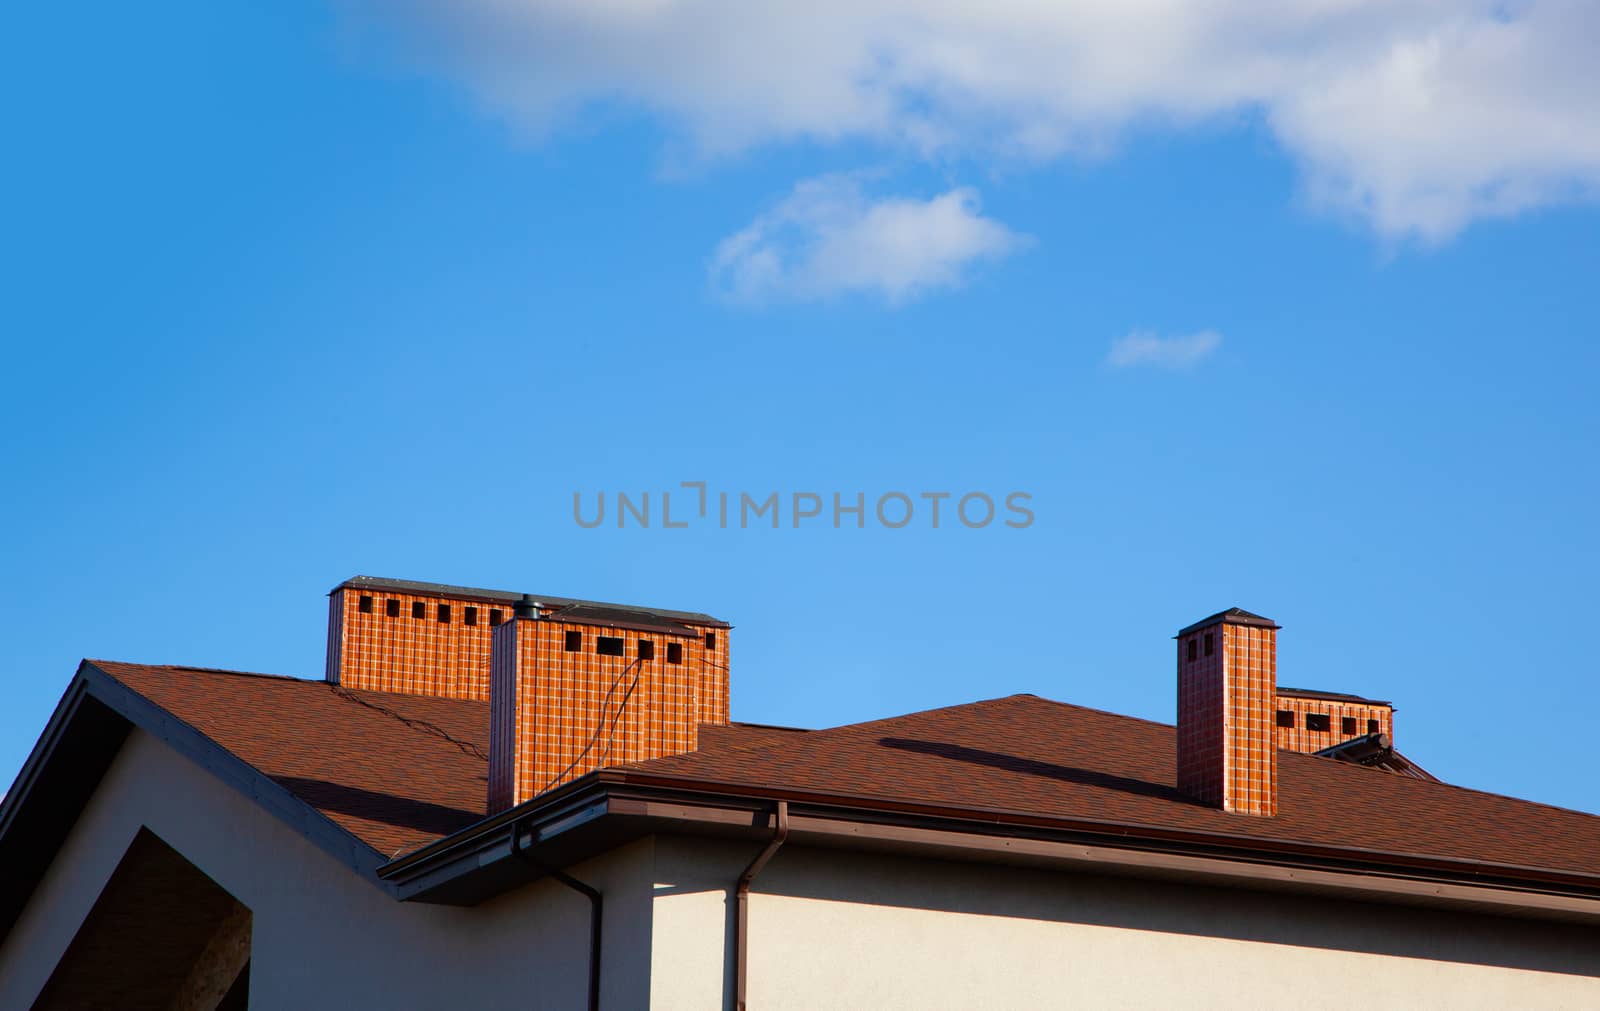 House with brick chimney in bright sunlight, against a deep blue sky